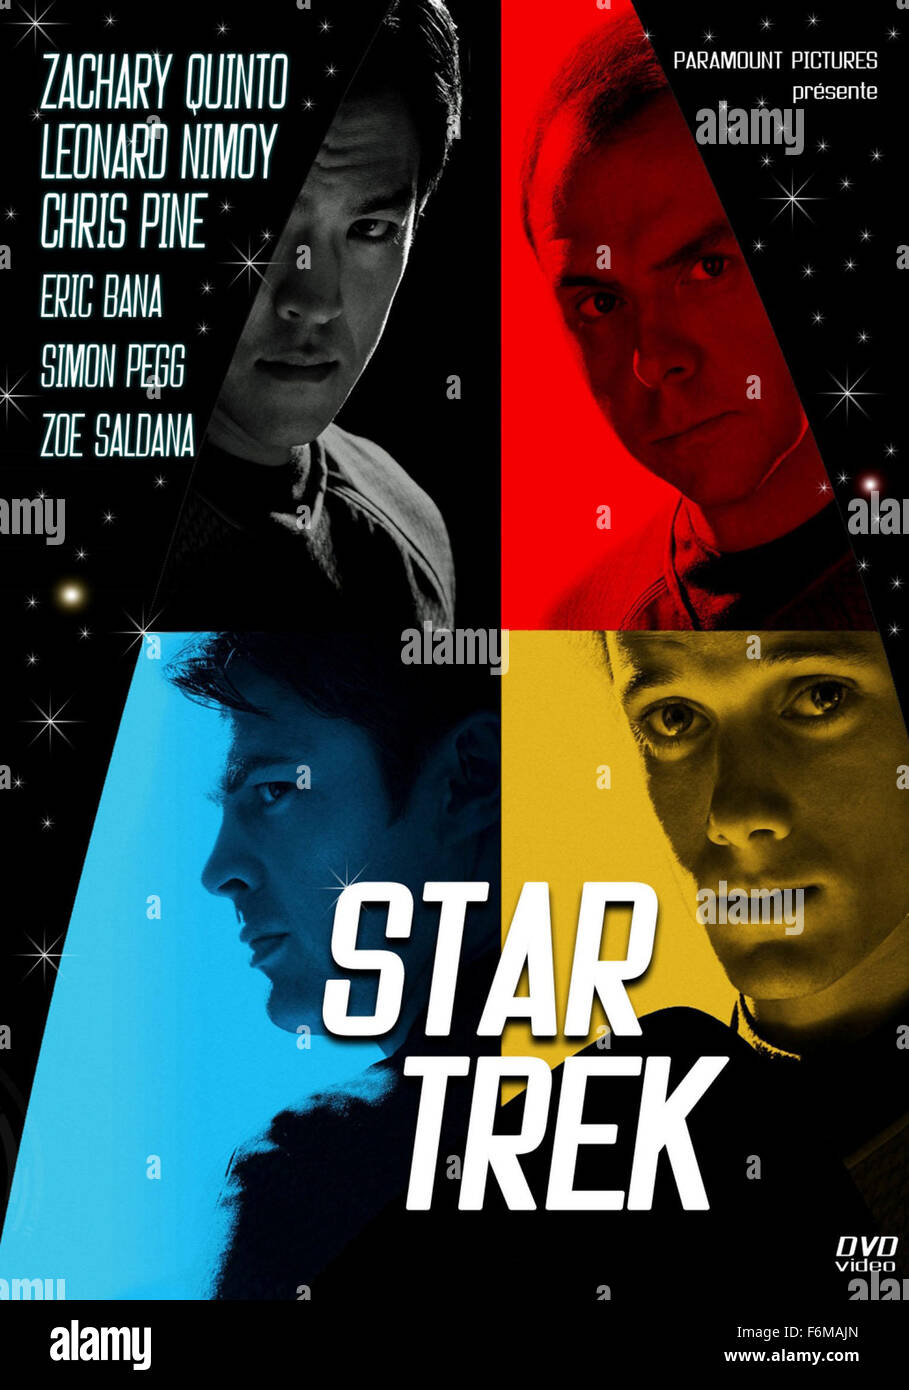 RELEASE DATE: May 8, 2009. MOVIE TITLE: Star Trek. STUDIO: Paramount Pictures. PLOT: A chronicle of the early days of James T. Kirk and his fellow USS Enterprise crew members. PICTURED: . Stock Photo